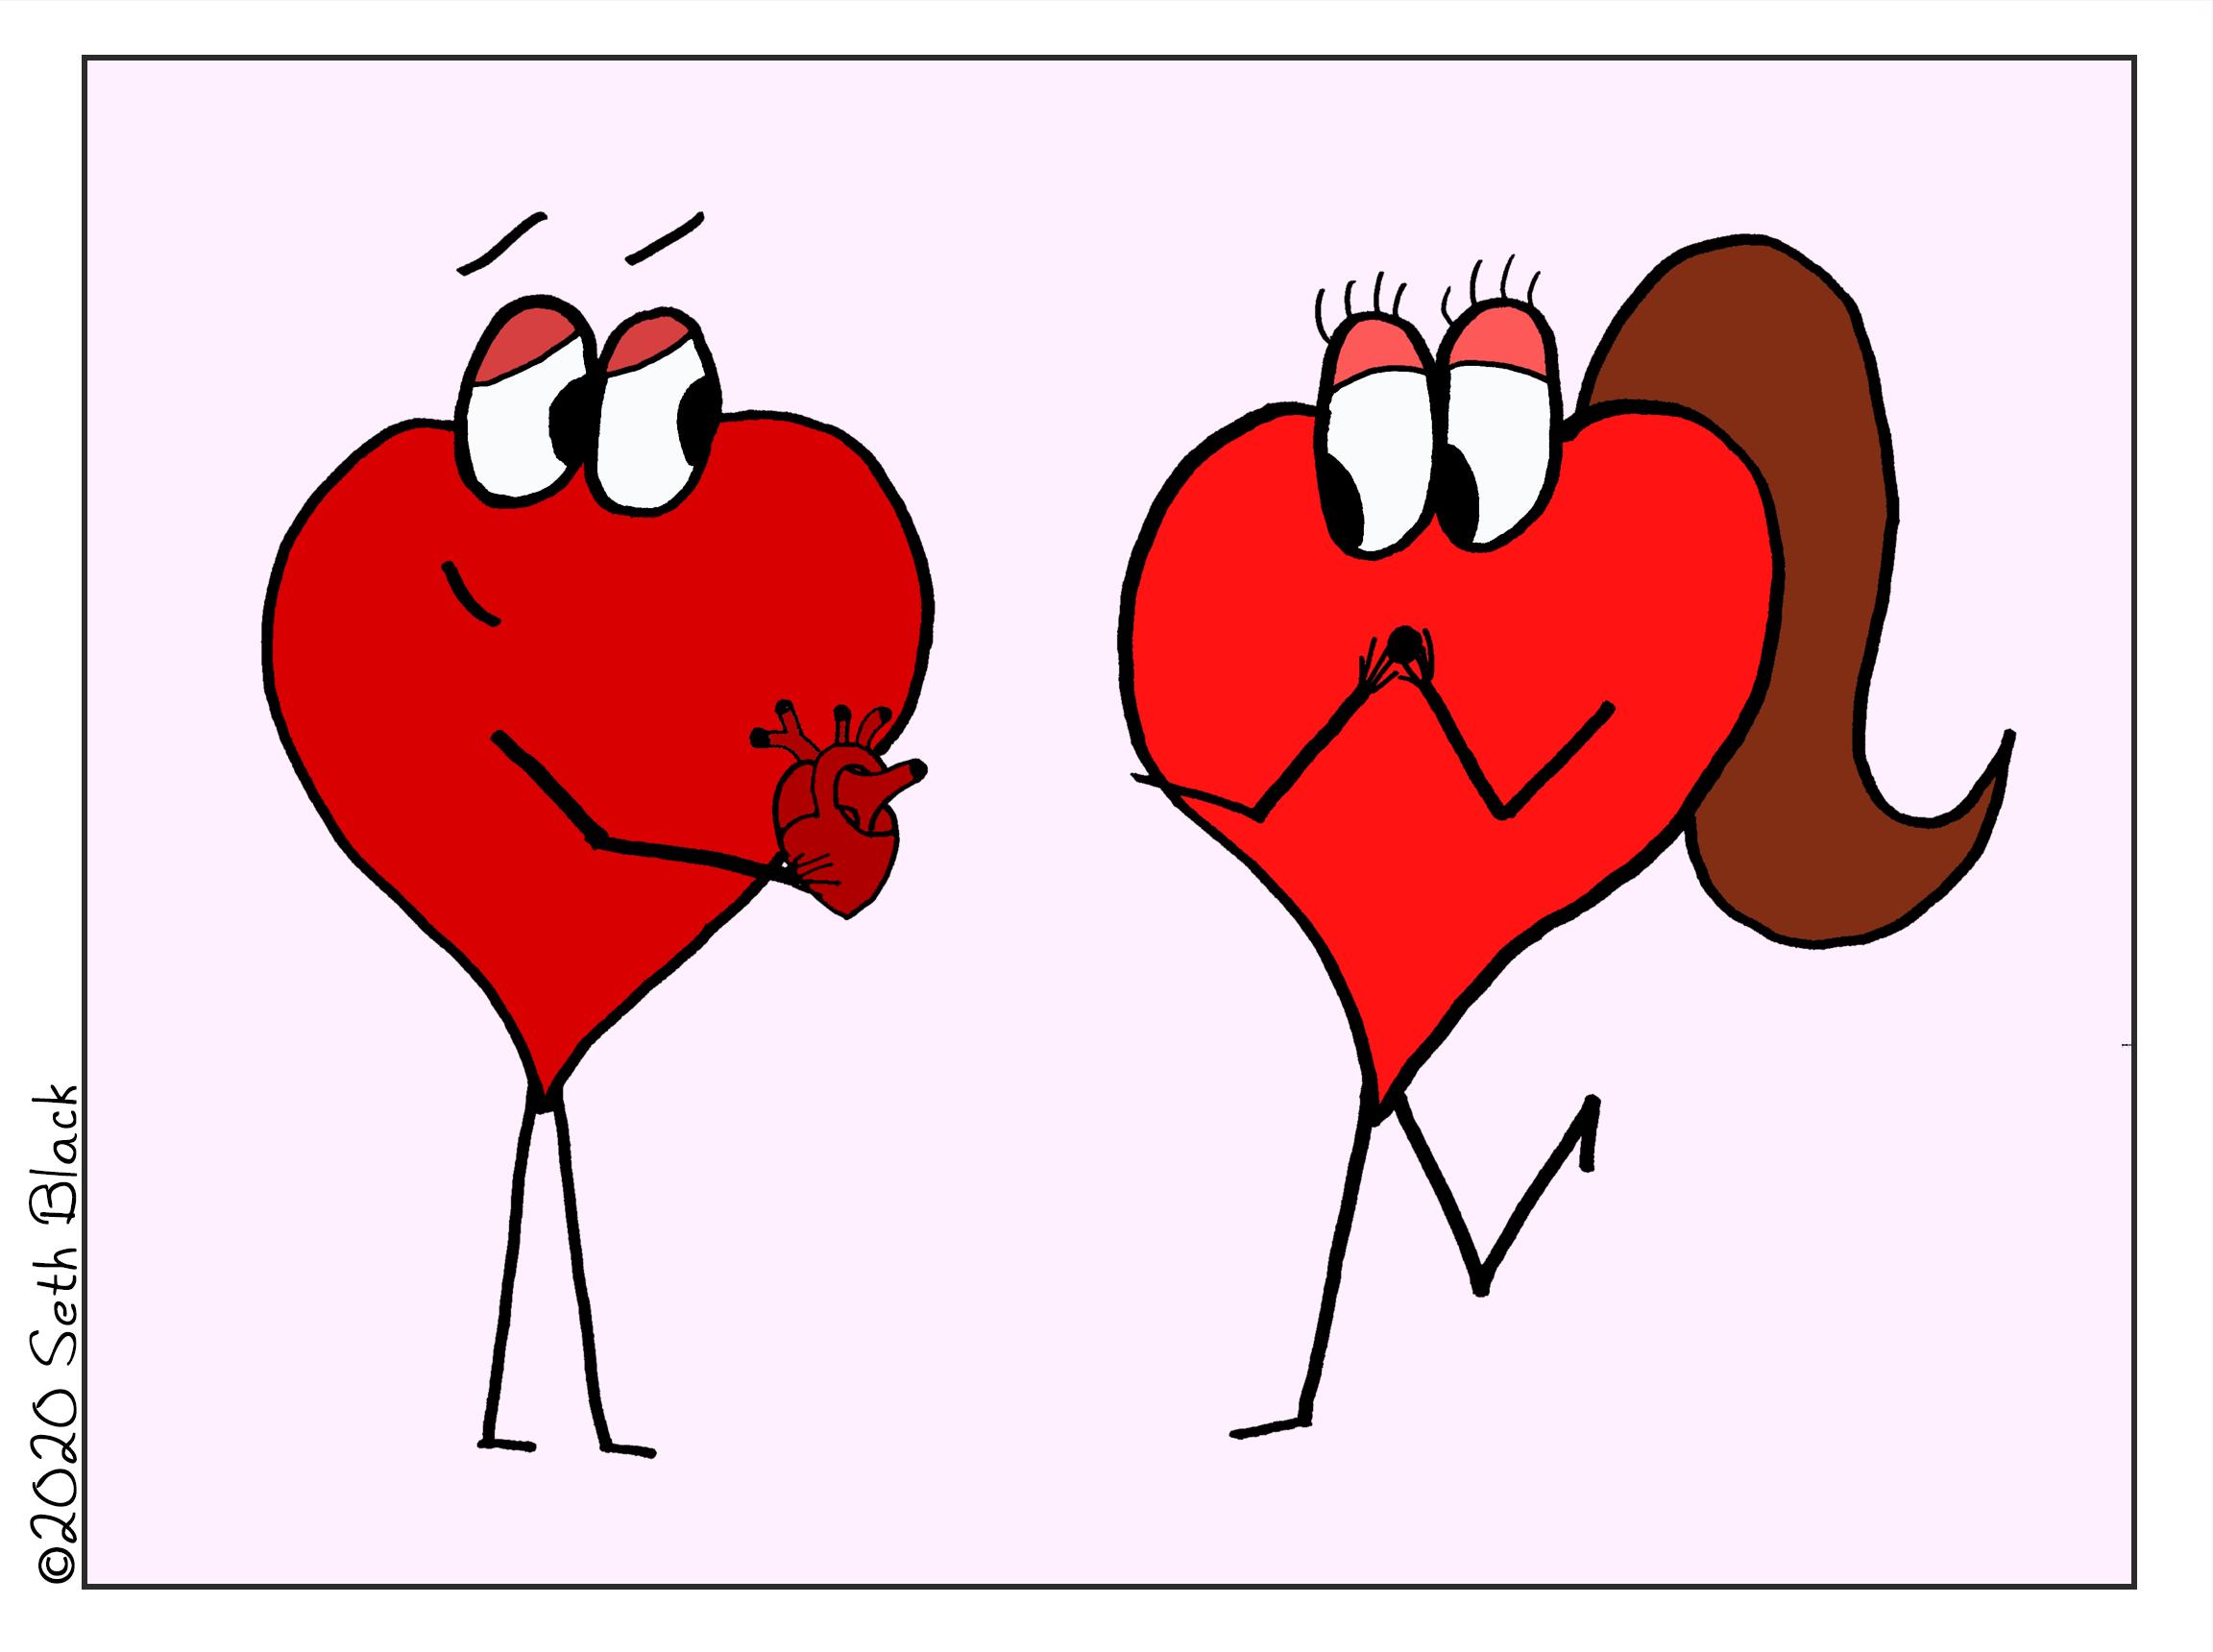 A male comic caricature heart is giving a female caricature heart a human heart for Valentine's Day. The female heart is surprised, and the male heart has a romantic look in his eyes.